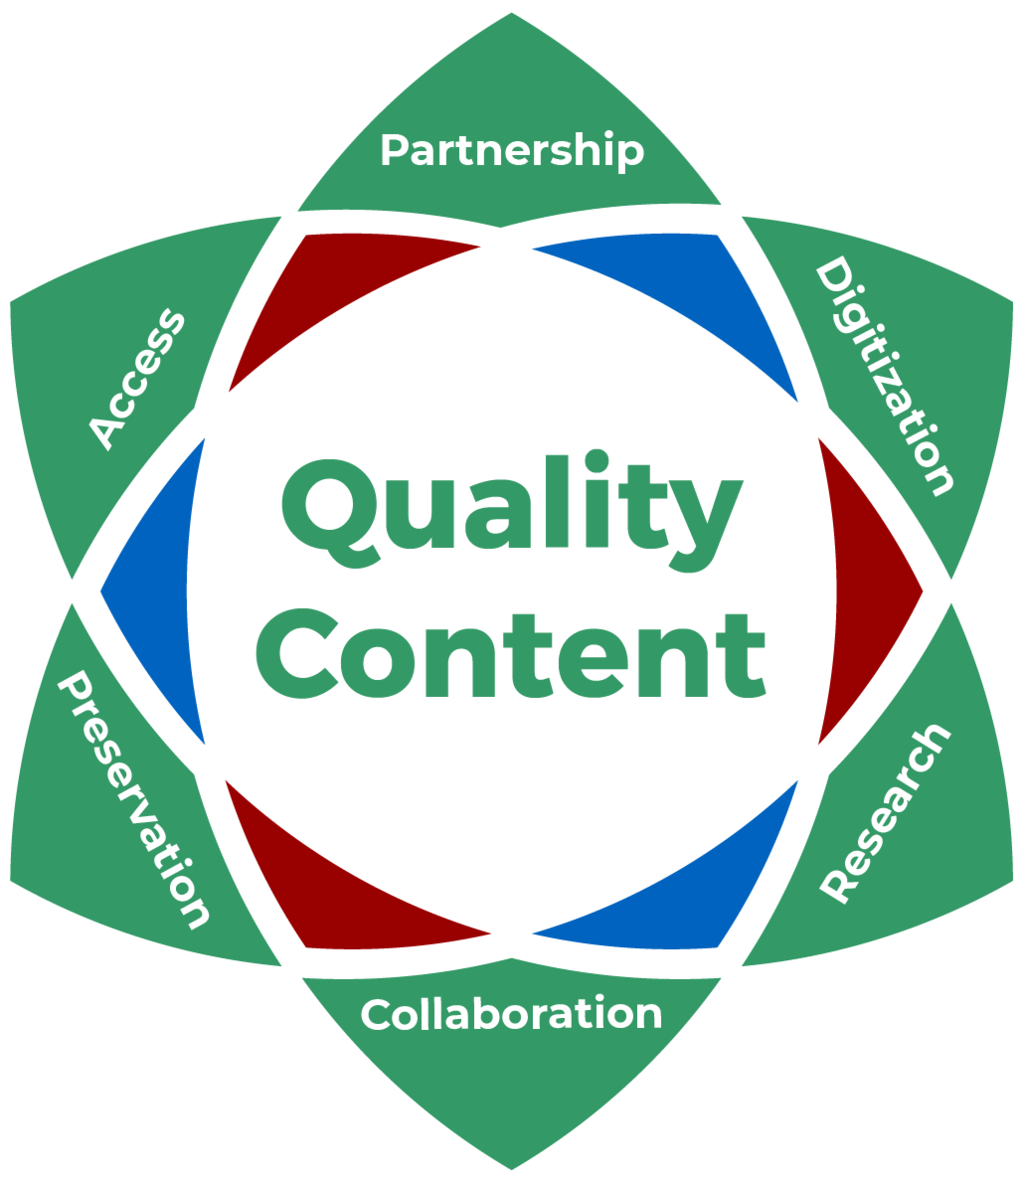 Website Branding- What Is Quality Content